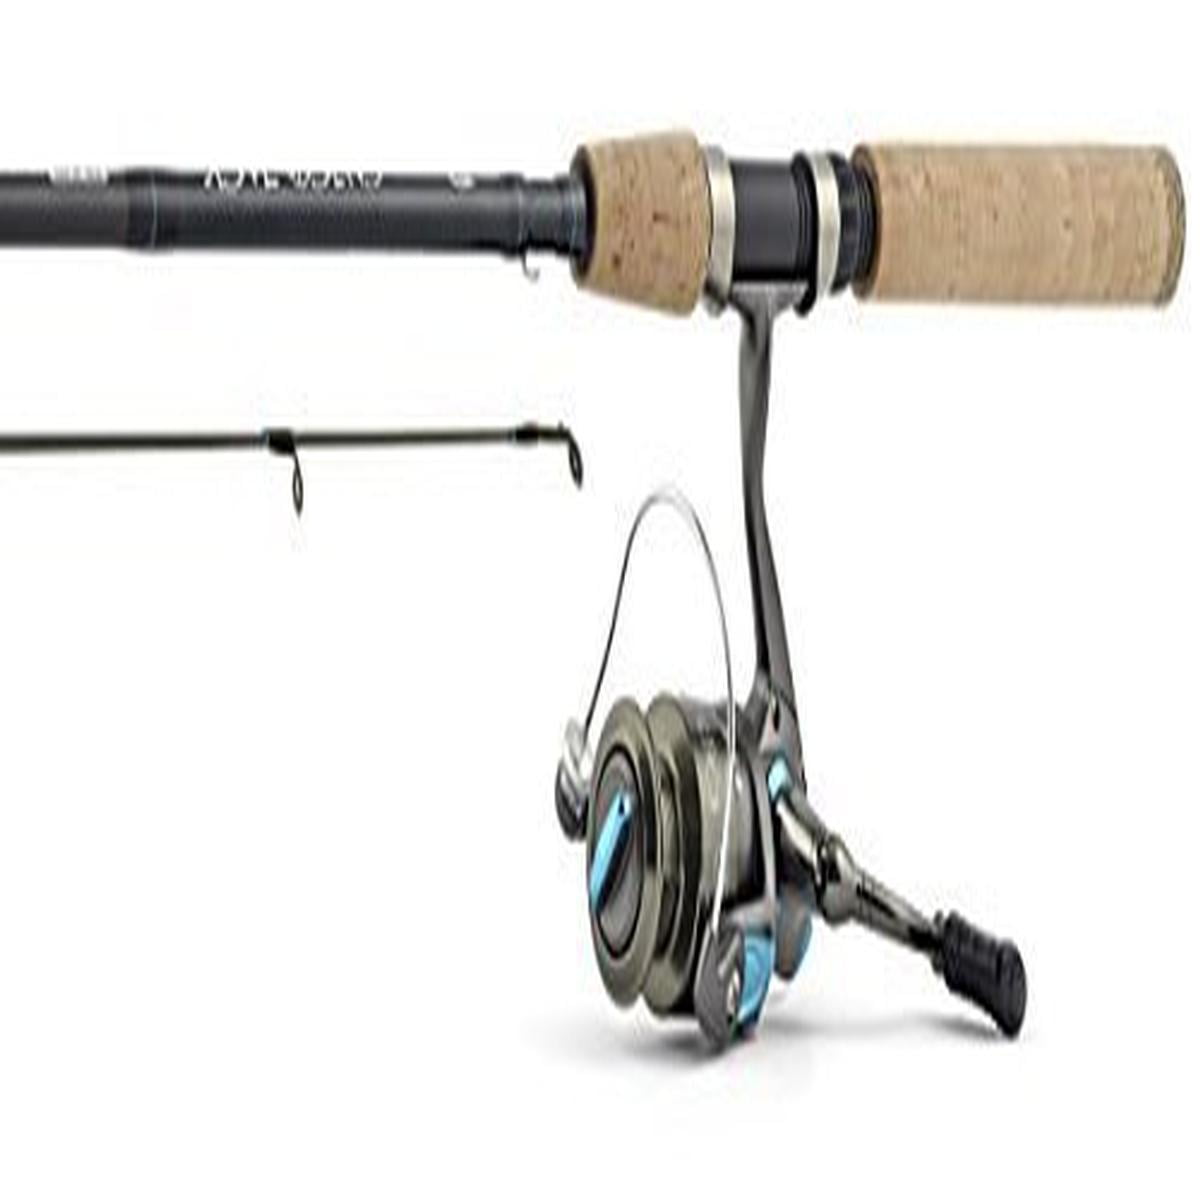 Hurricane Calico Jack Inshore Spinning Rod and Reel Combo 7'1 - 8-17/Size  40 - 1 Piece - CAJ701S/3140 